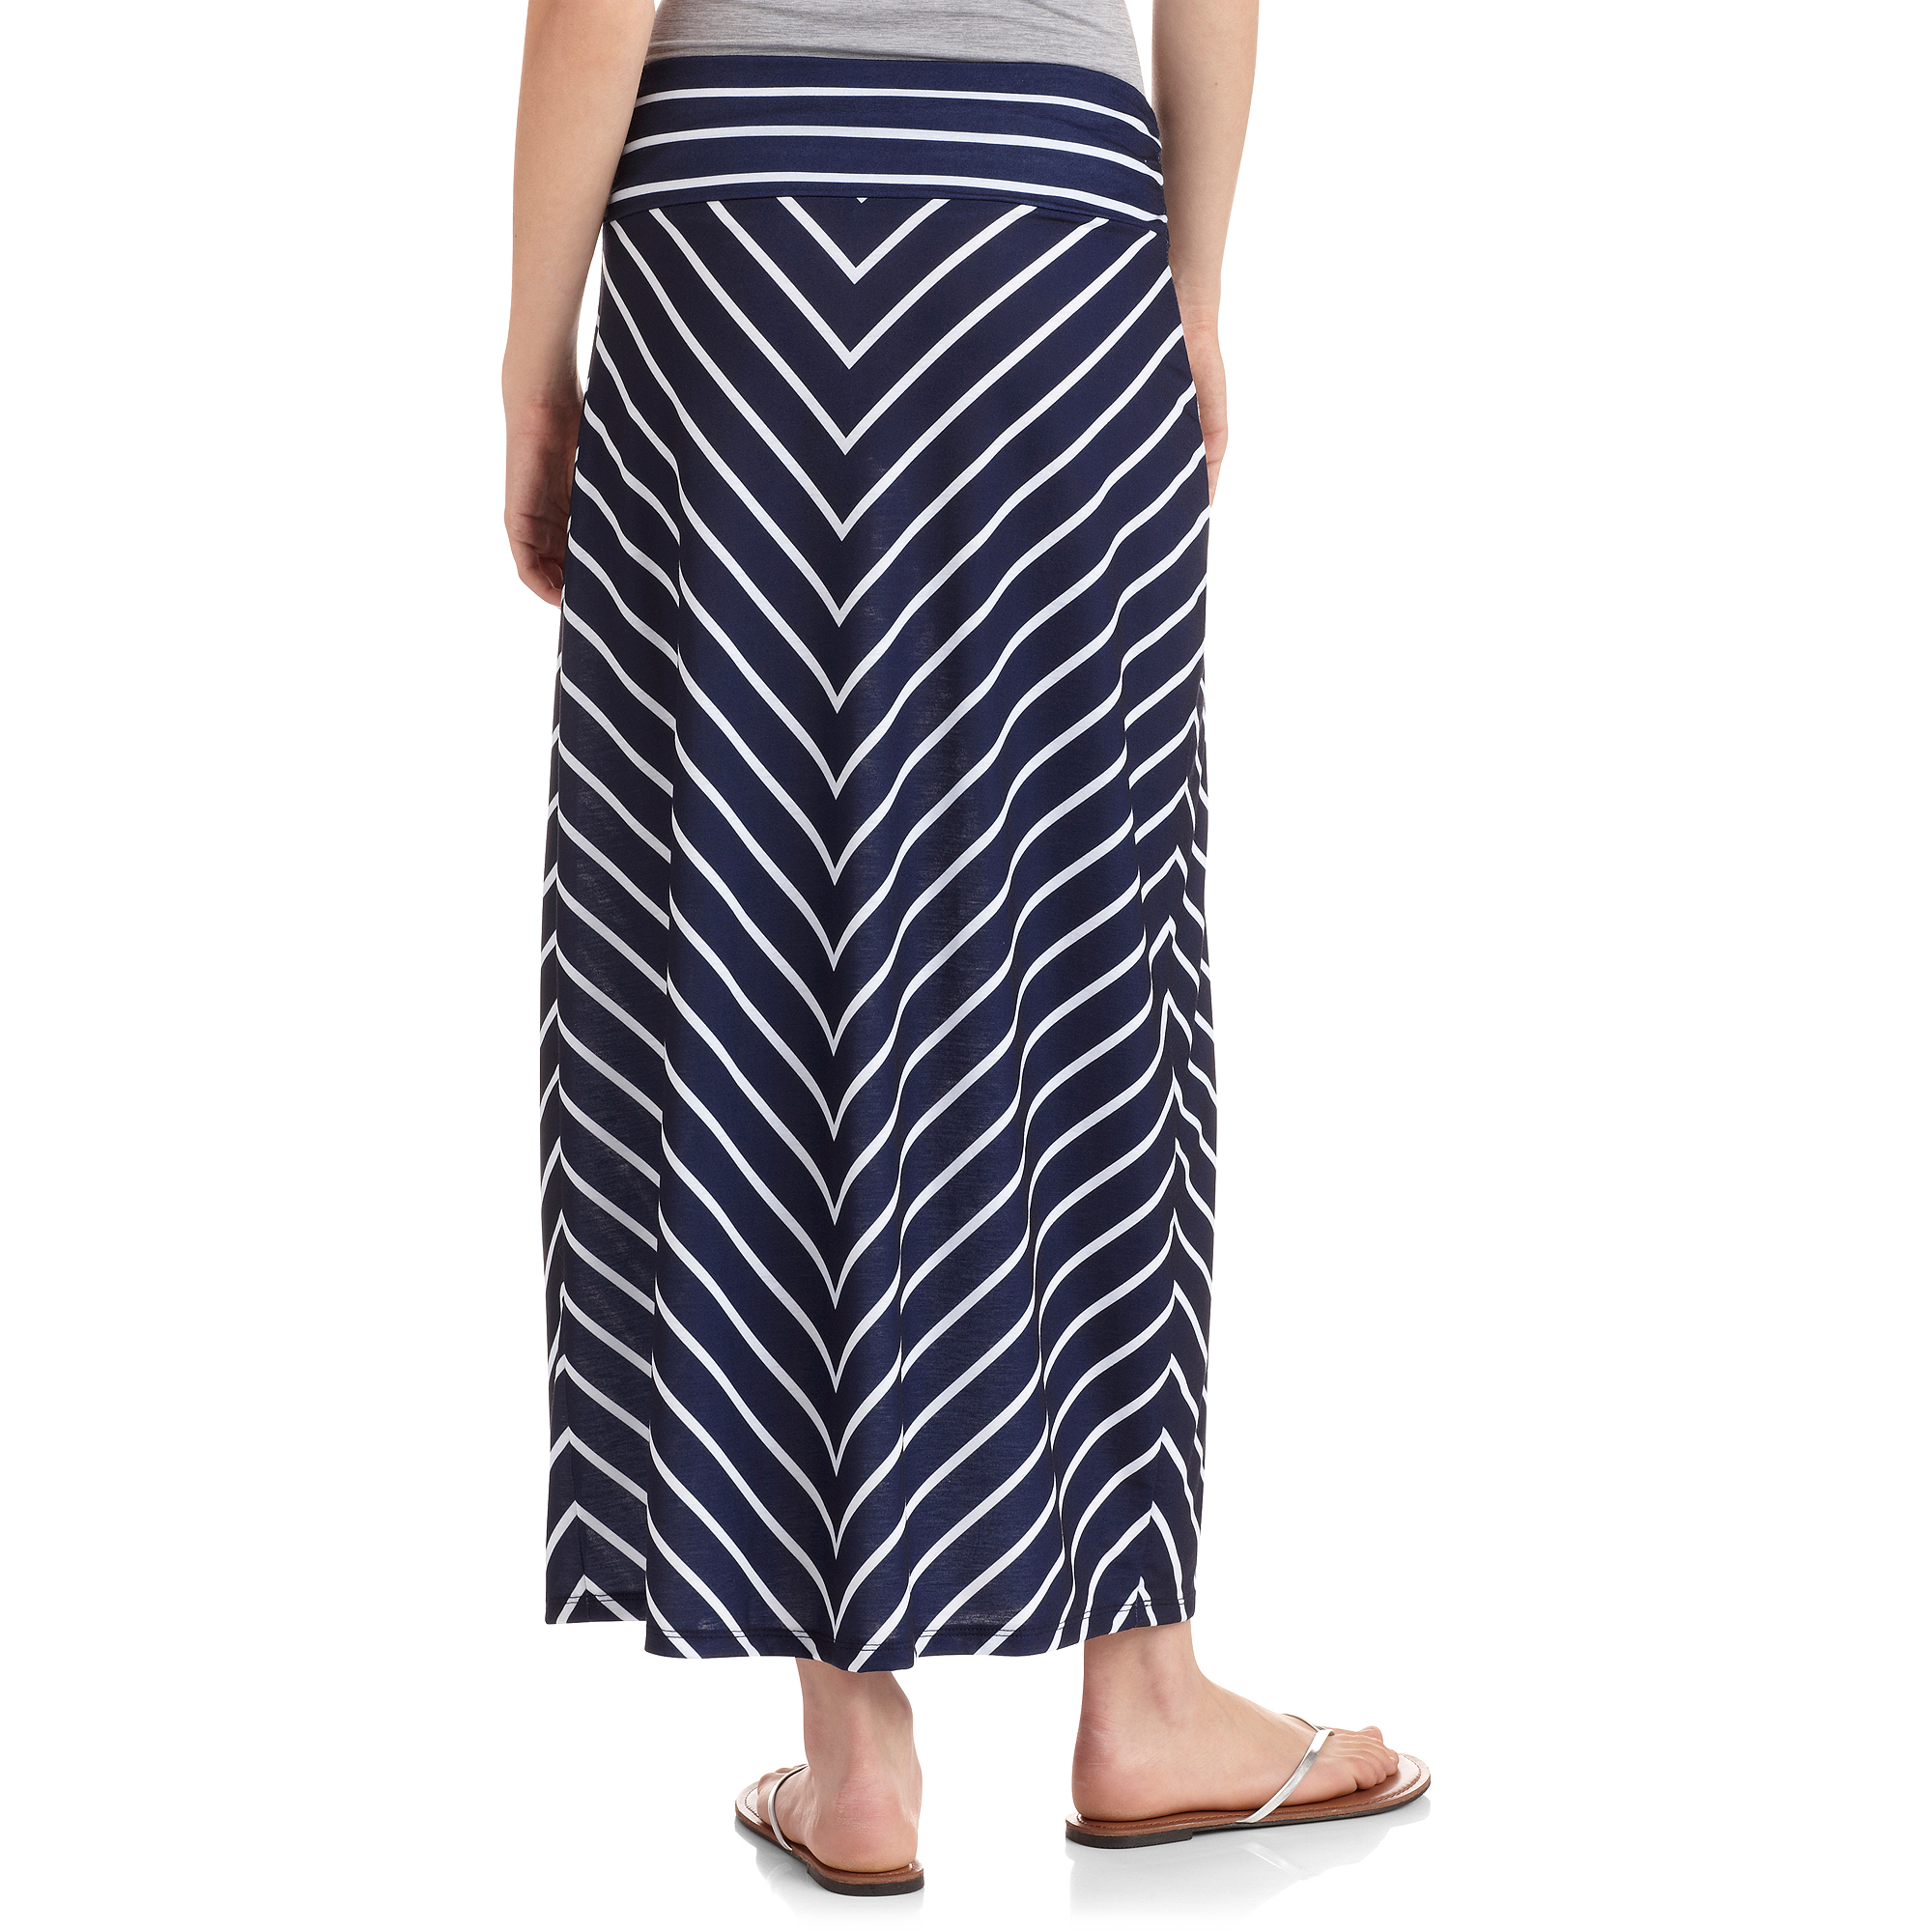 Women's Maxi Skirt with Shirred Waistband - image 1 of 2